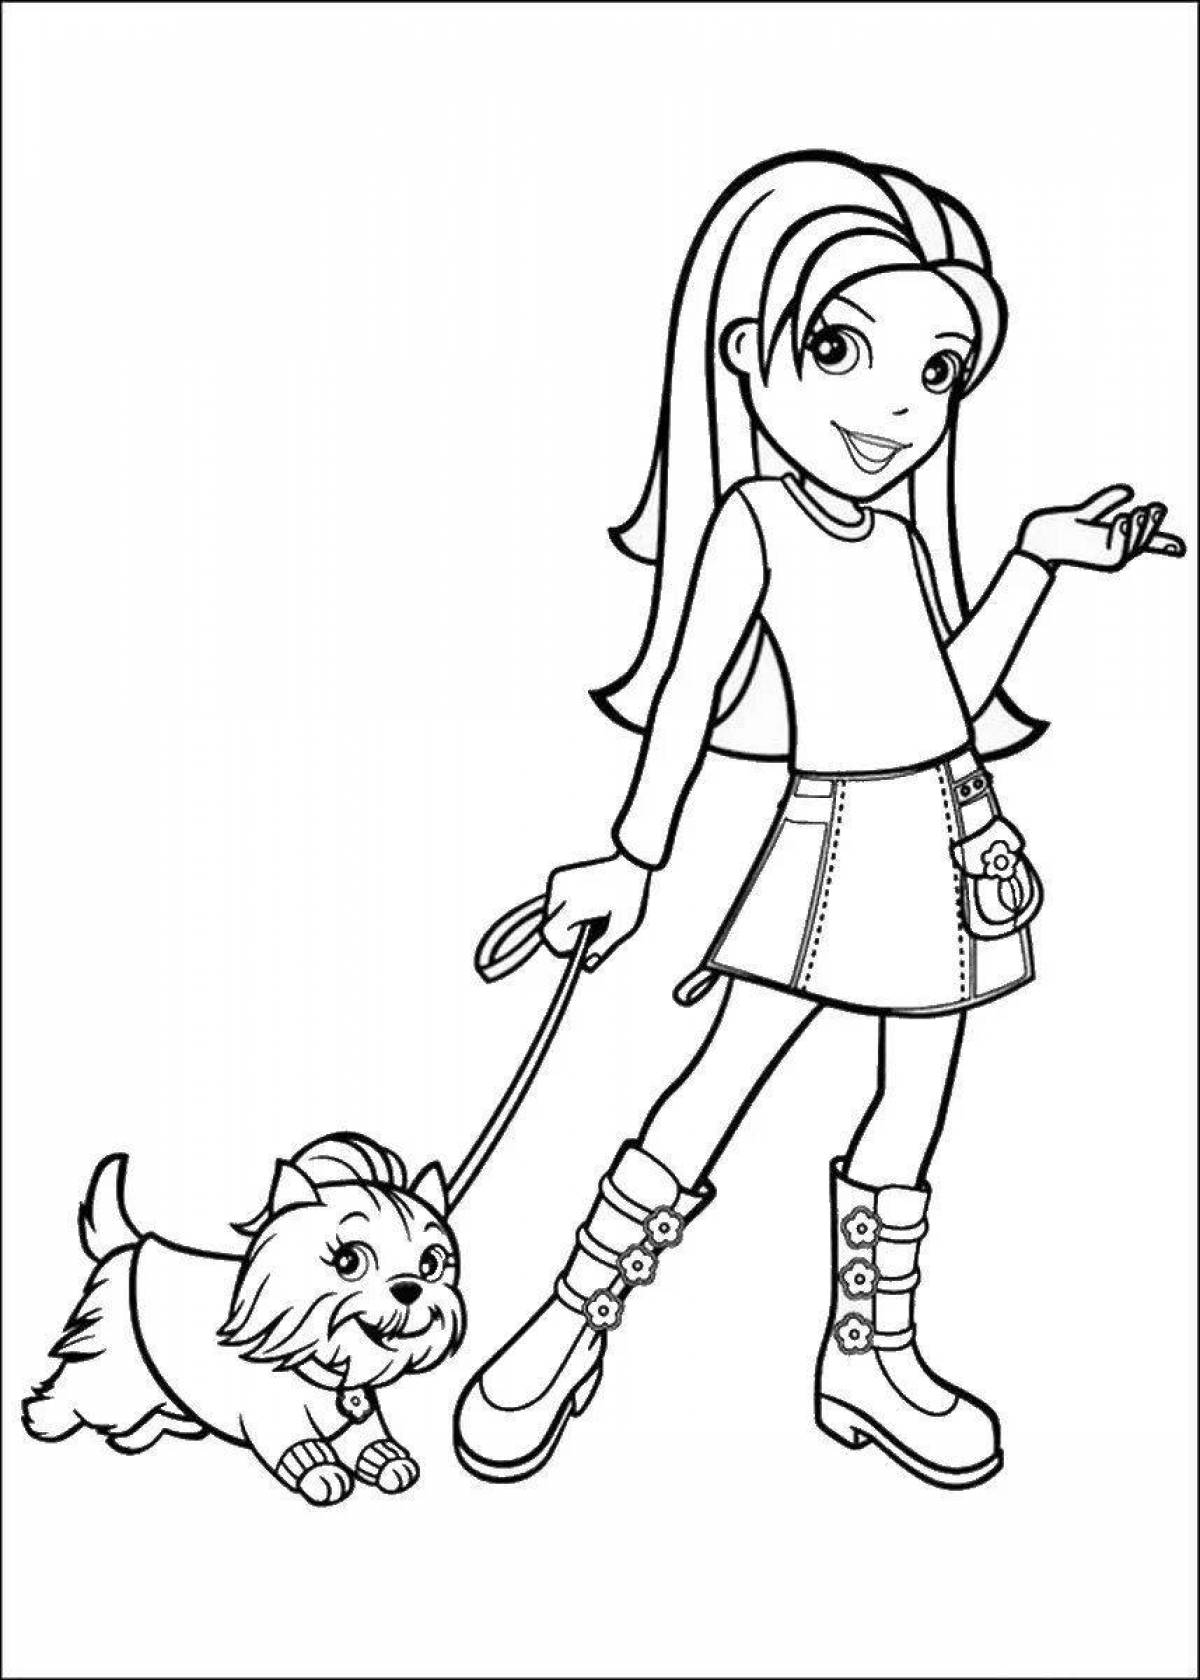 Violent coloring girl with a dog